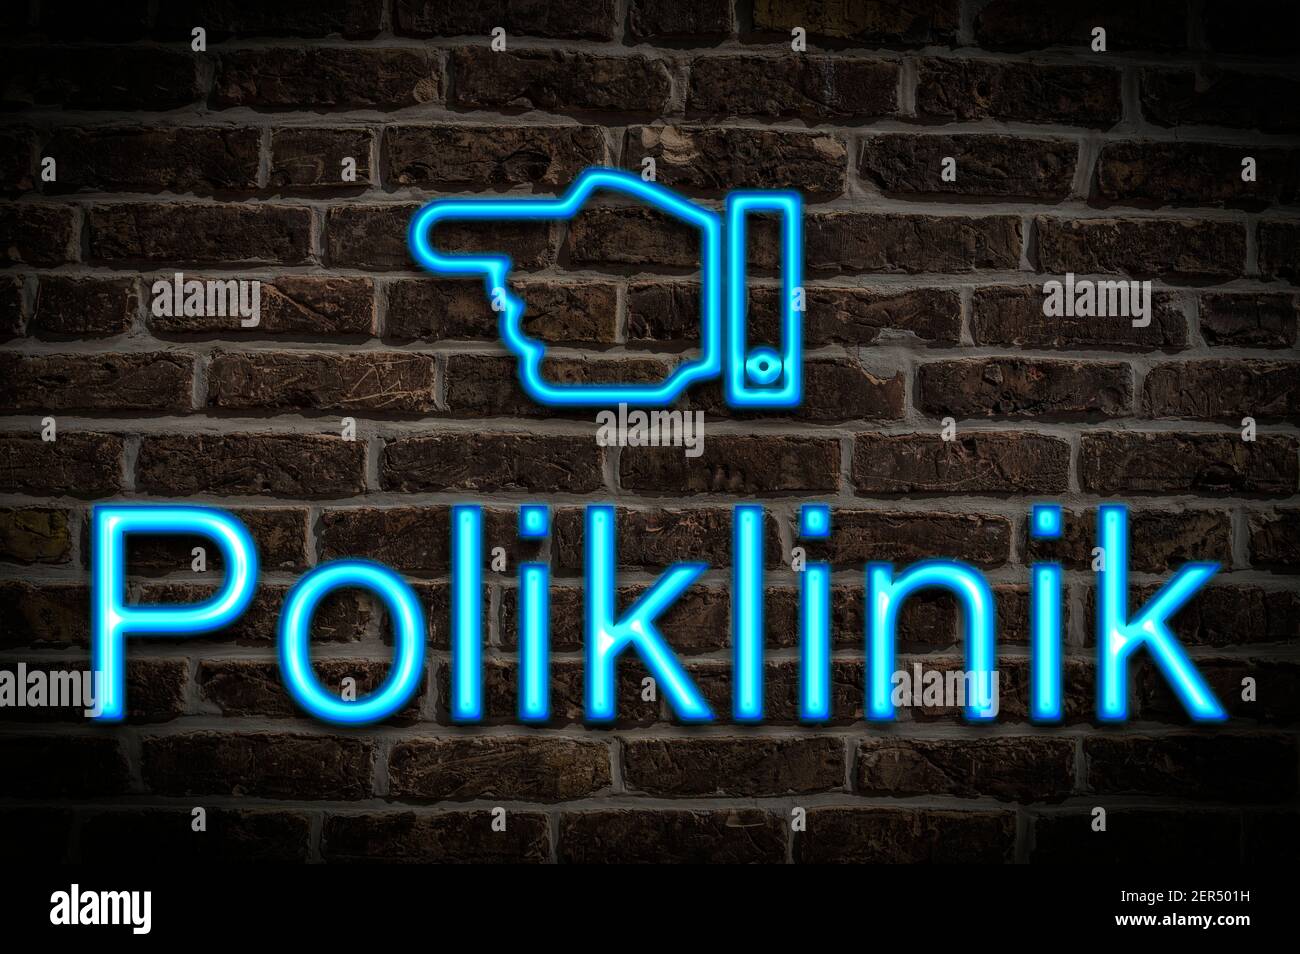 Detail photo of a neon sign on a wall with the inscription Poliklinik (Polyclinic) Stock Photo